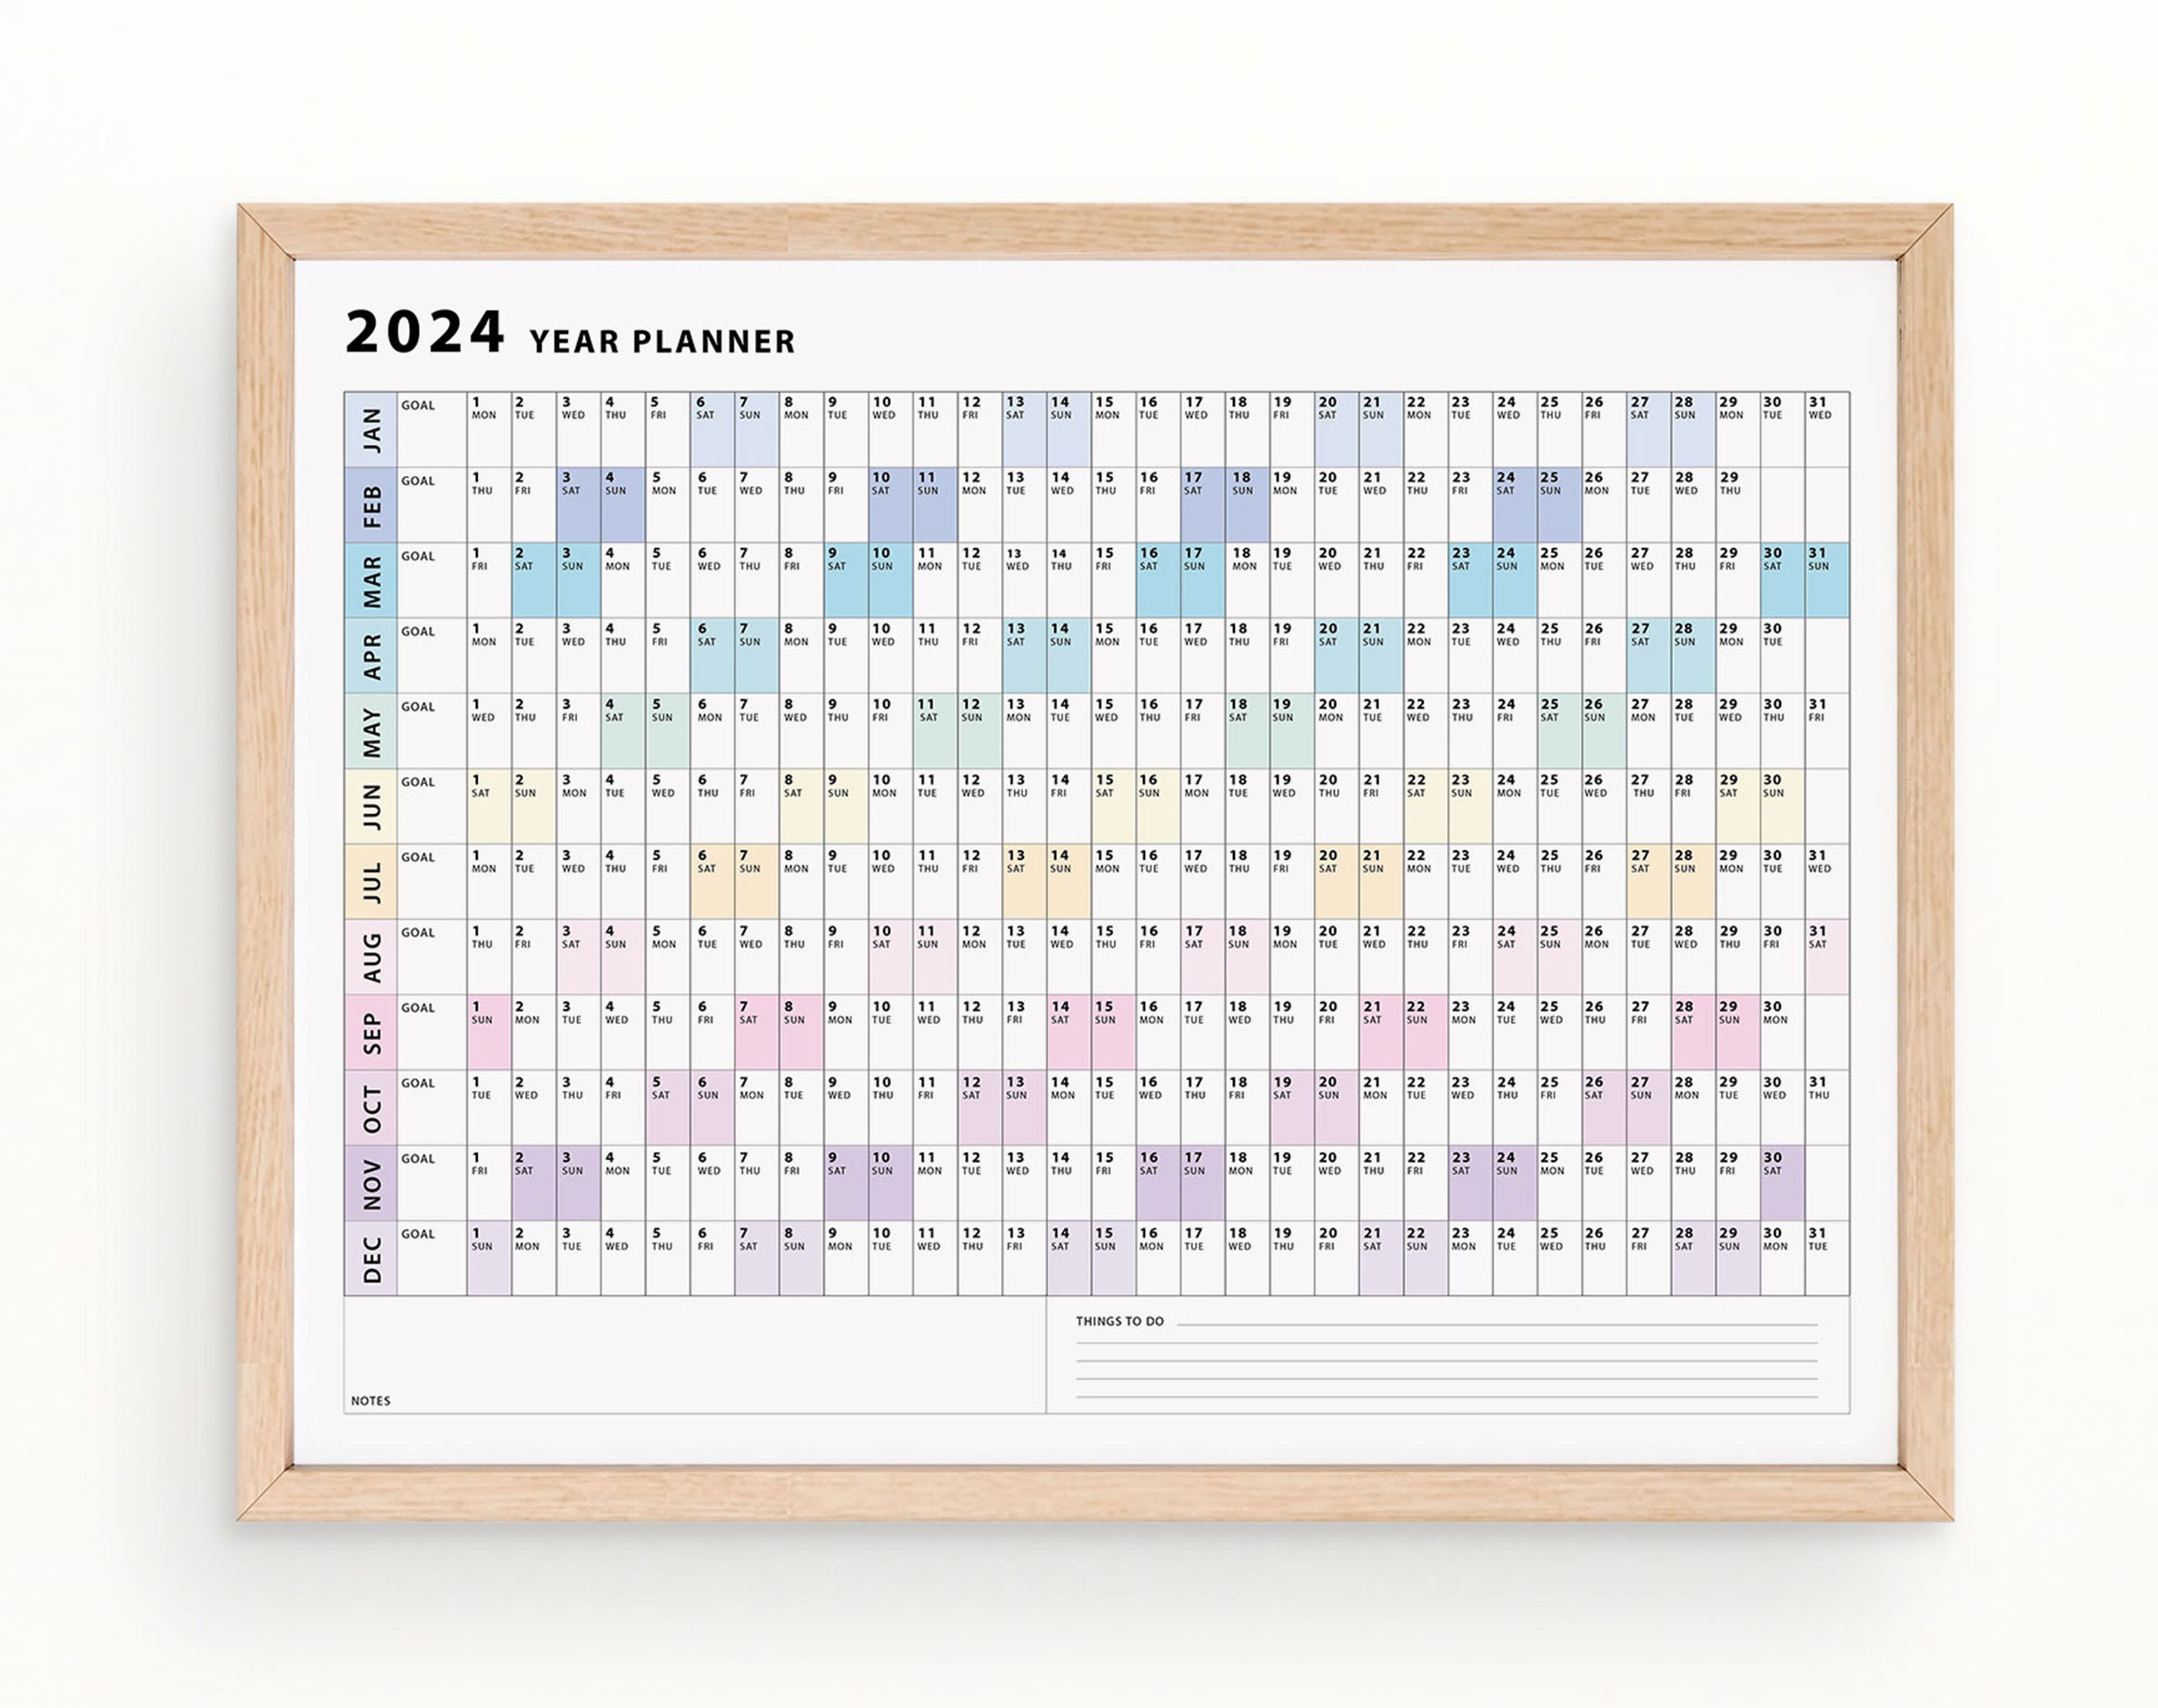 2024 Year Planner 2024 Wall Calendar Digital Wall Planner - Etsy | 2024 Yearly Calendar And Planner